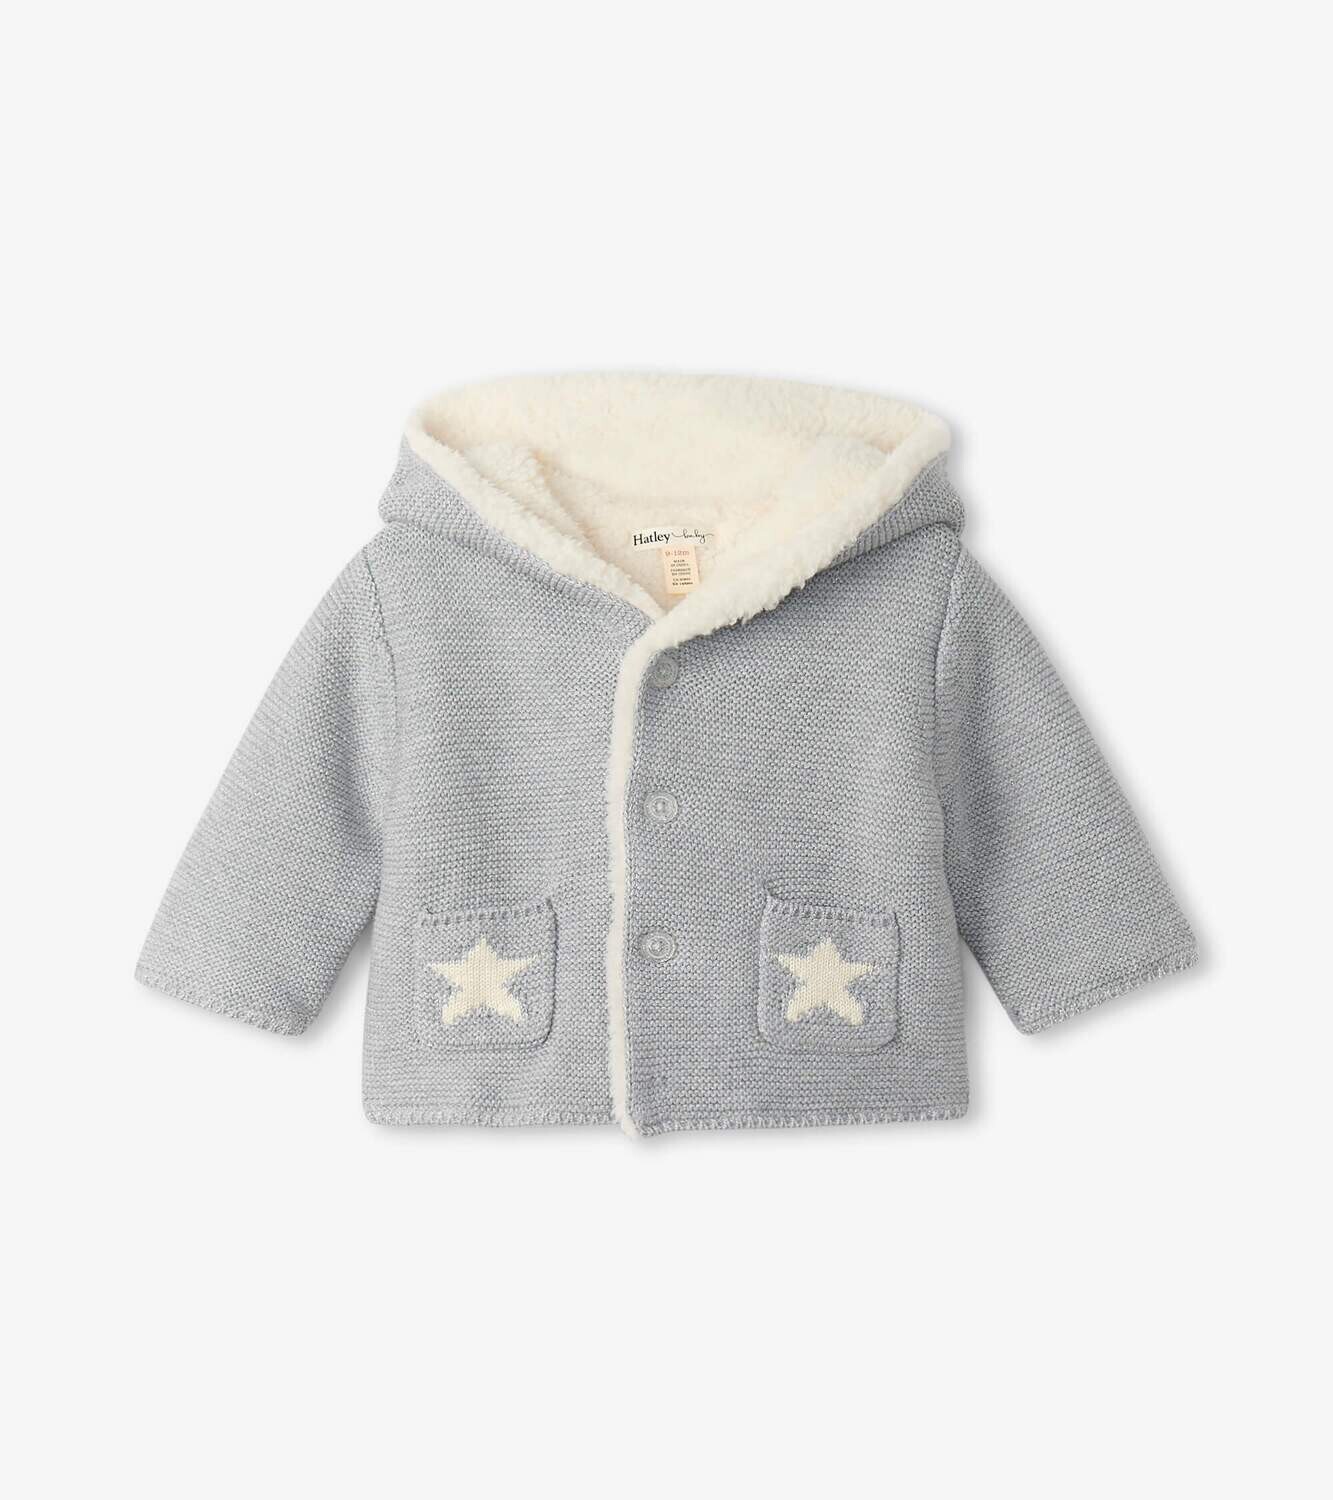 Hatley Baby Girl Cozy Star Sherpa Lined Sweater 87